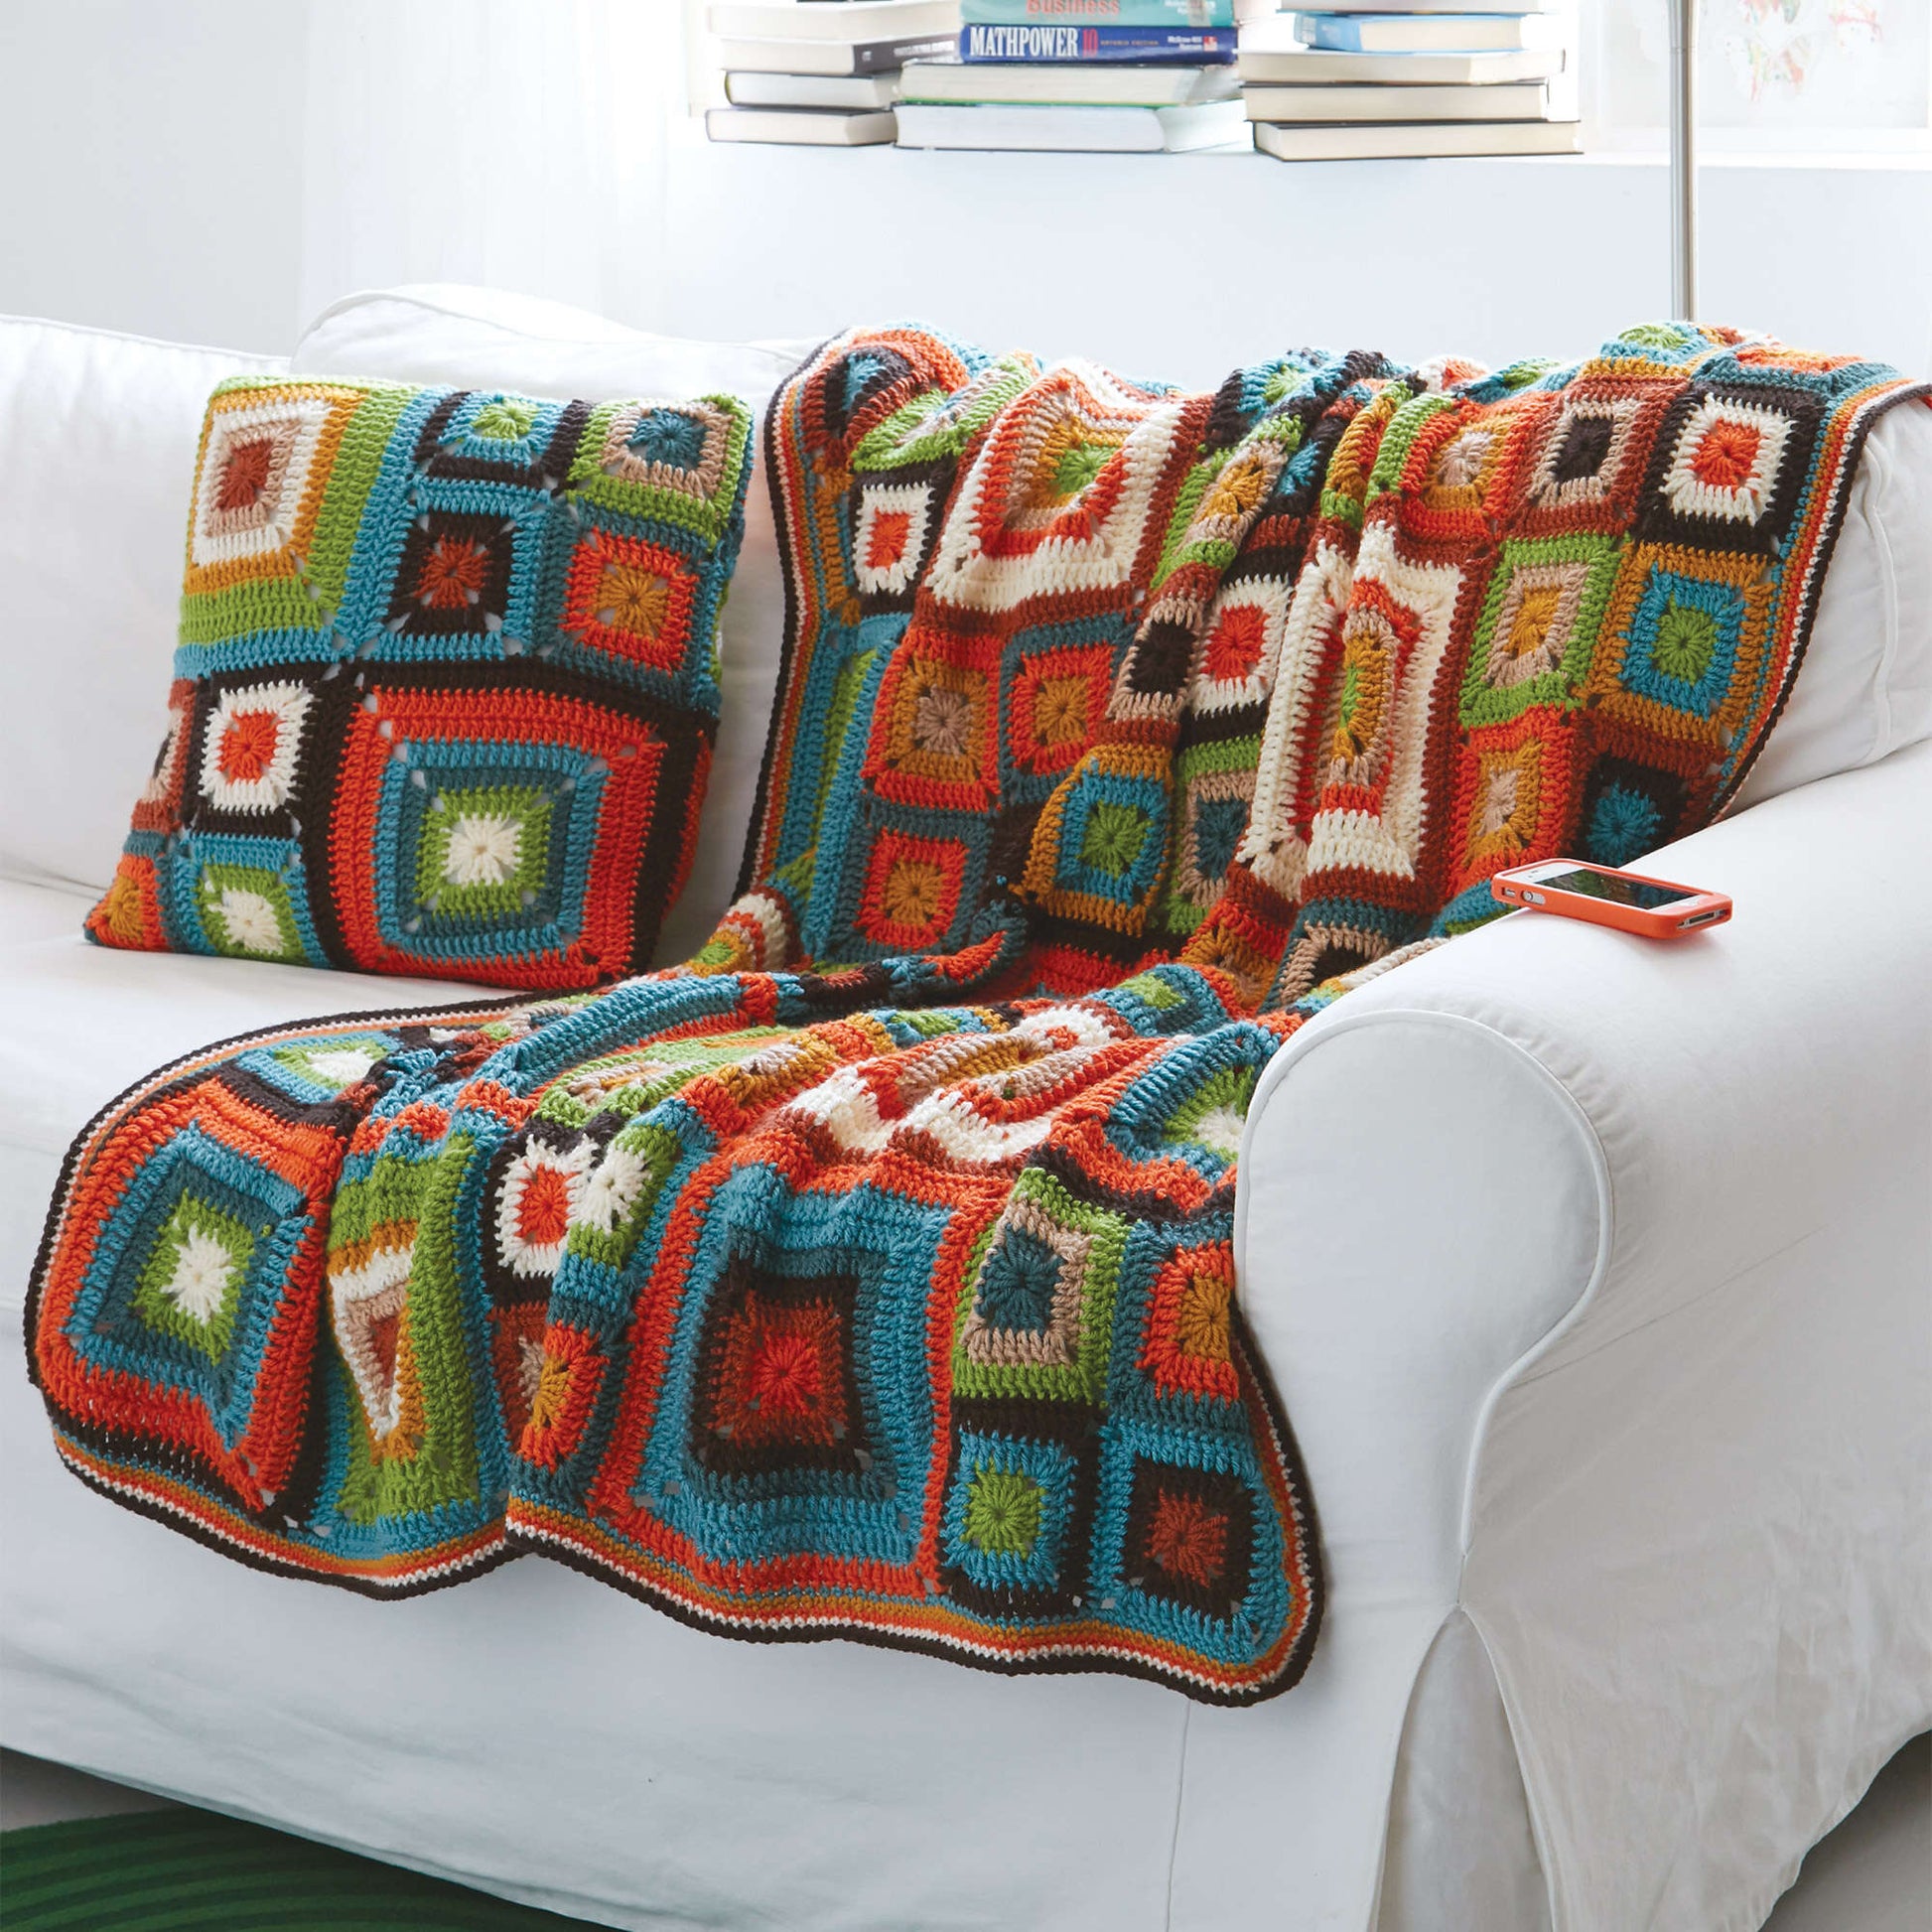 Patons Bright Squares Crochet Blanket And Pillow Set Single Size